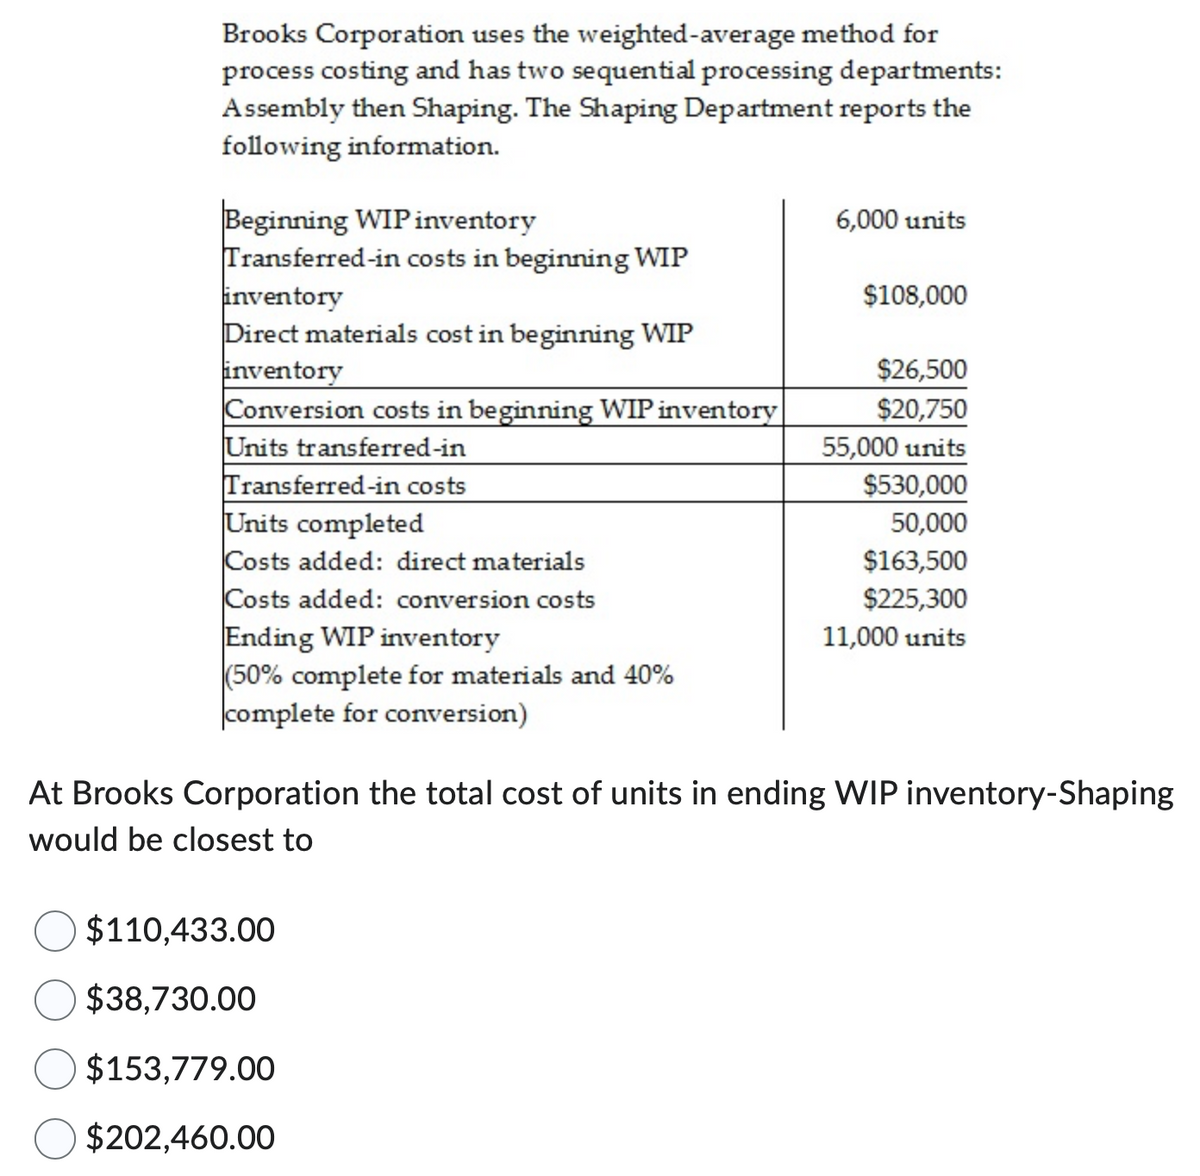 Brooks Corporation uses the weighted-average method for
process costing and has two sequential processing departments:
Assembly then Shaping. The Shaping Department reports the
following information.
Beginning WIP inventory
Transferred-in costs in beginning WIP
inventory
Direct materials cost in beginning WIP
inventory
Conversion costs in beginning WIP inventory
Units transferred-in
Transferred-in costs
Units completed
Costs added: direct materials
6,000 units
$108,000
$26,500
$20,750
55,000 units
$530,000
50,000
$163,500
Costs added: conversion costs
$225,300
Ending WIP inventory
11,000 units
(50% complete for materials and 40%
complete for conversion)
At Brooks Corporation the total cost of units in ending WIP inventory-Shaping
would be closest to
$110,433.00
$38,730.00
$153,779.00
$202,460.00